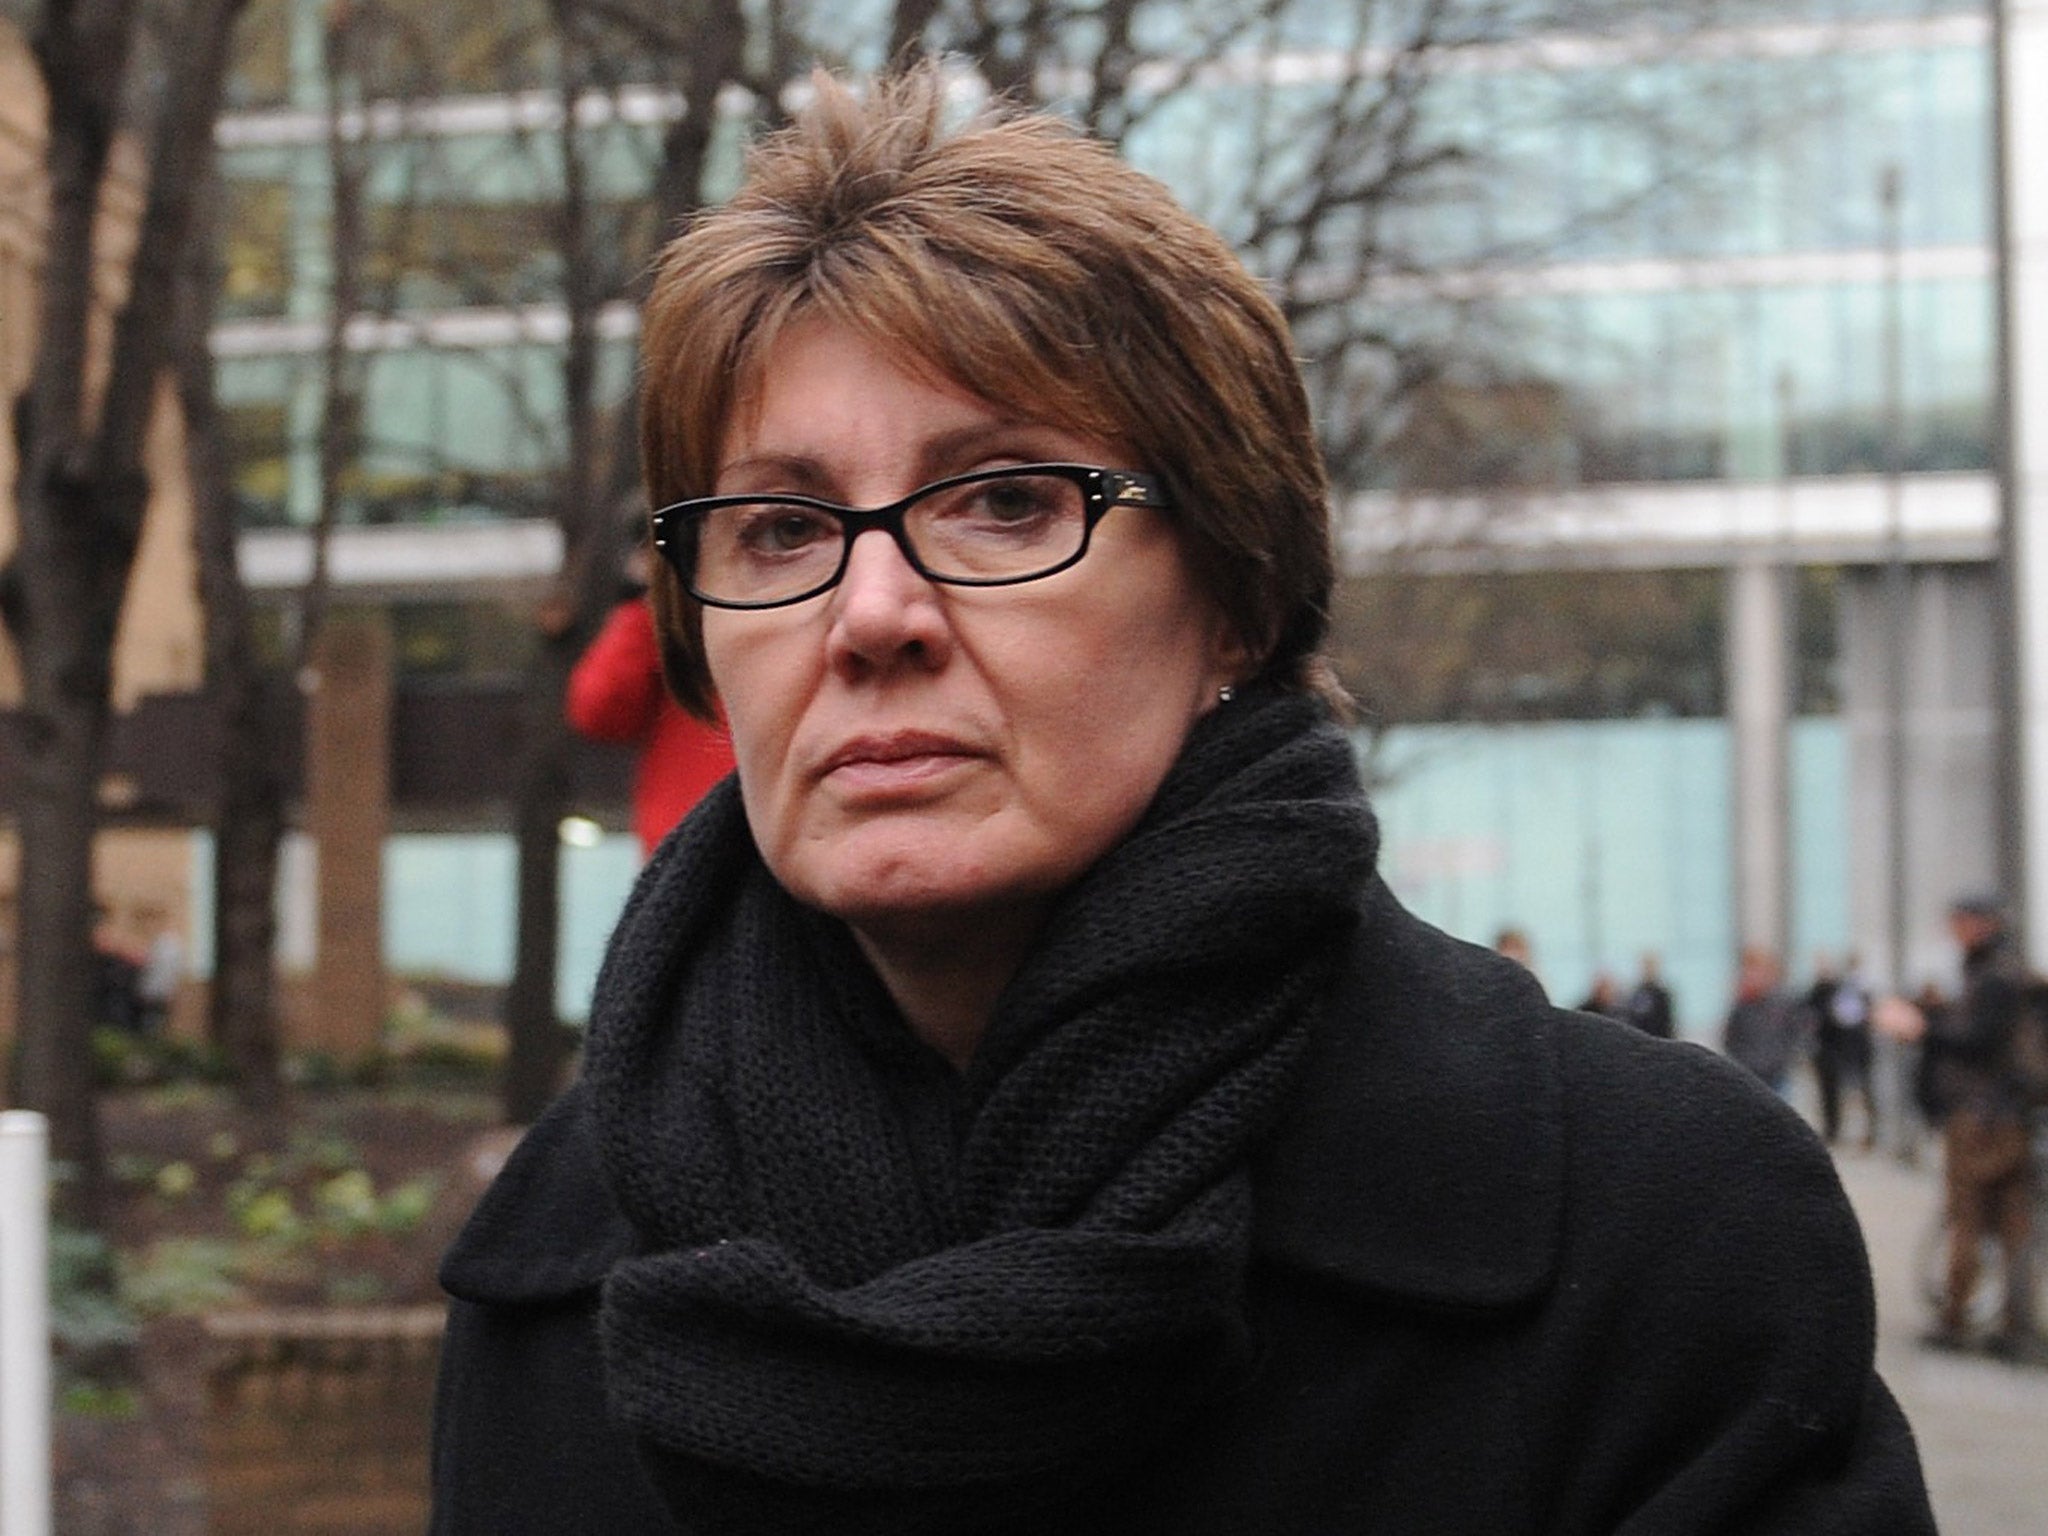 Deputy Chief Inspector April Casburn who has been jailed